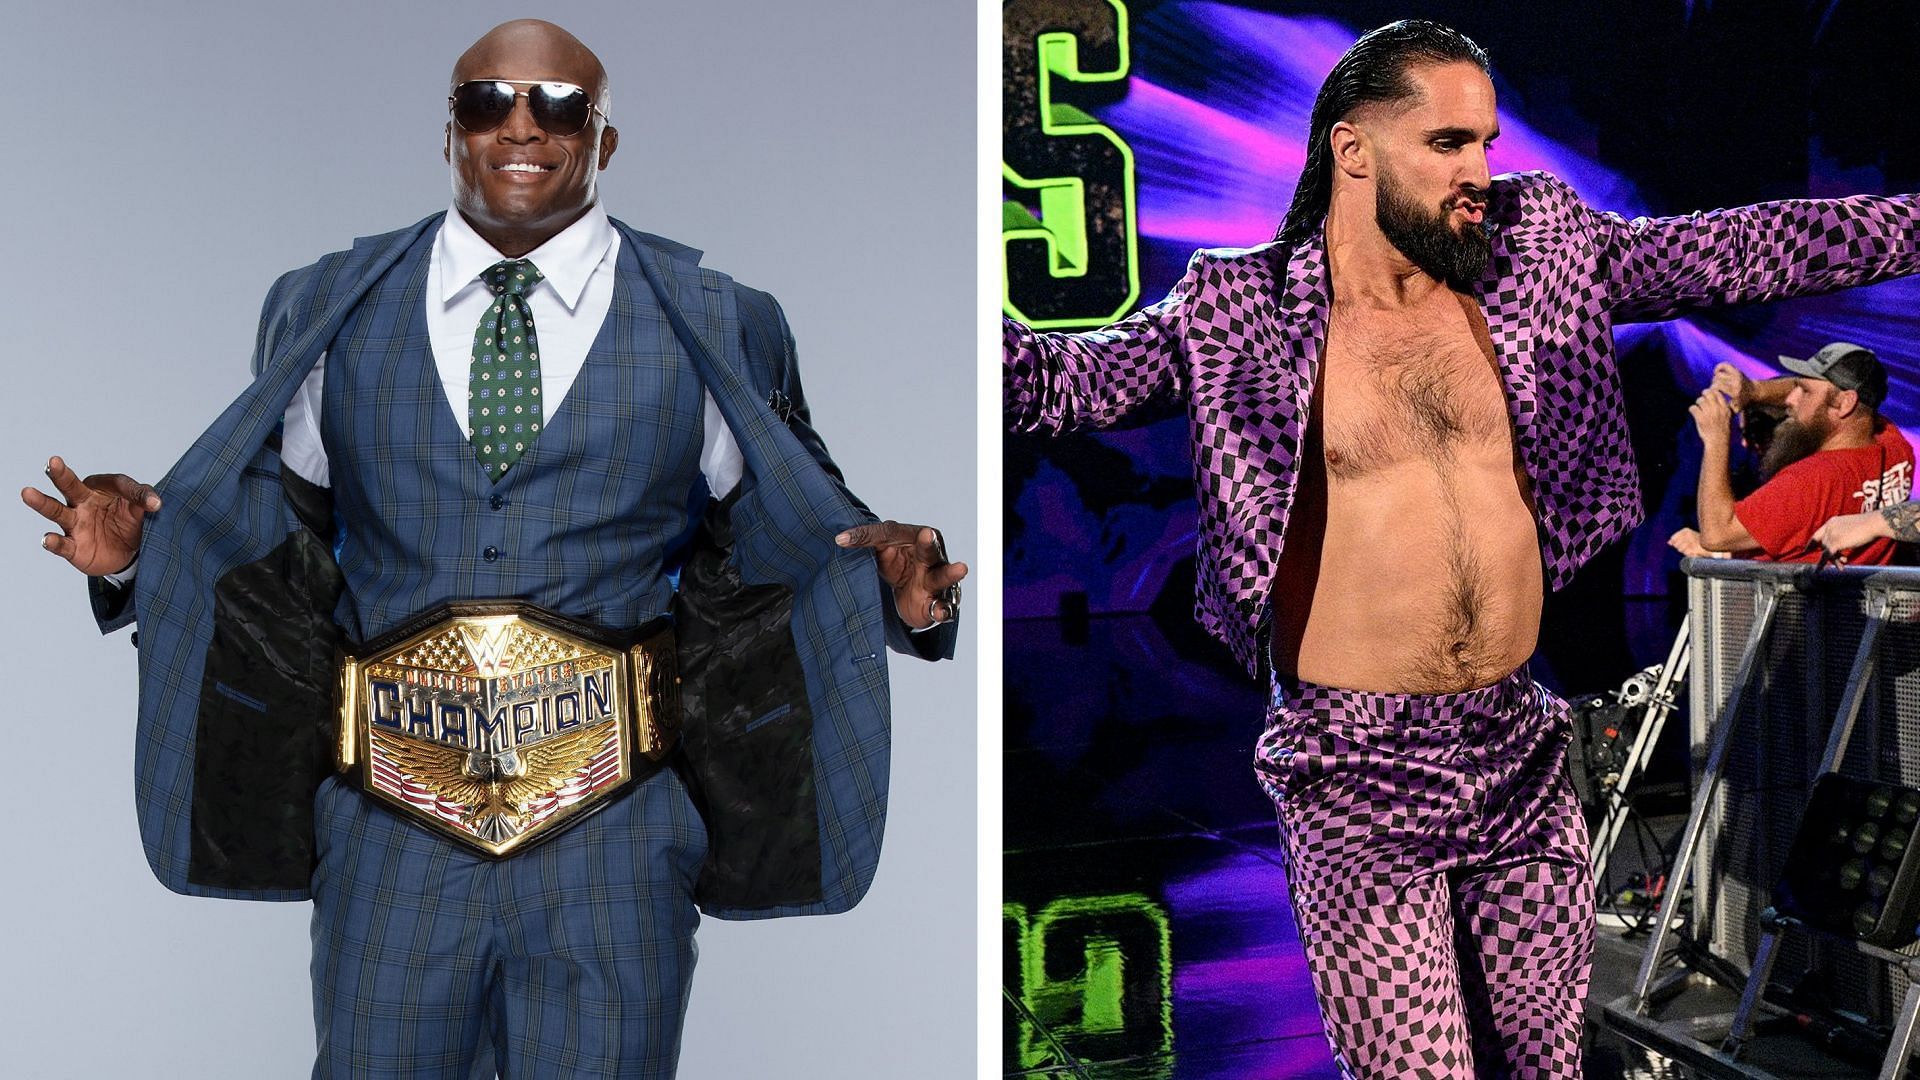 Seth Rollins and Bobby Lashley will battle for the United States Championship on WWE RAW